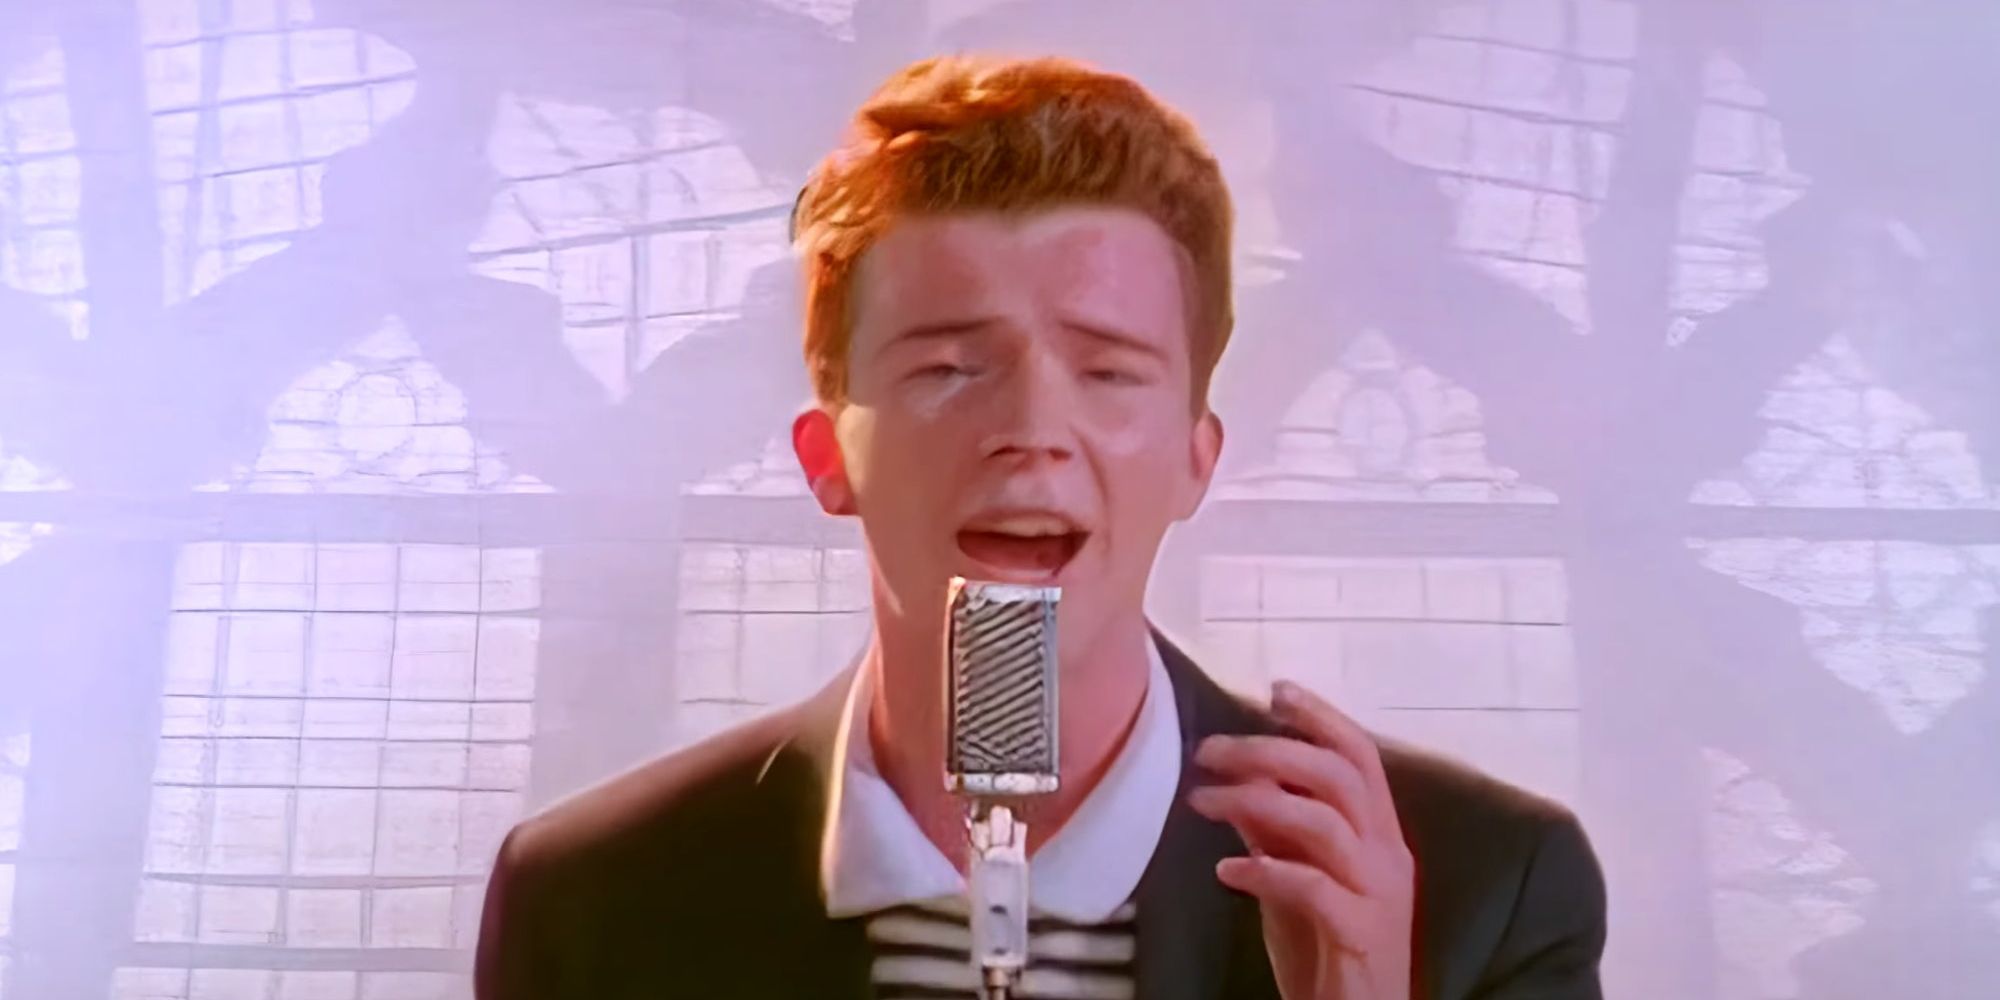 Never gonna give you up: The surprising resilience of the Rickroll